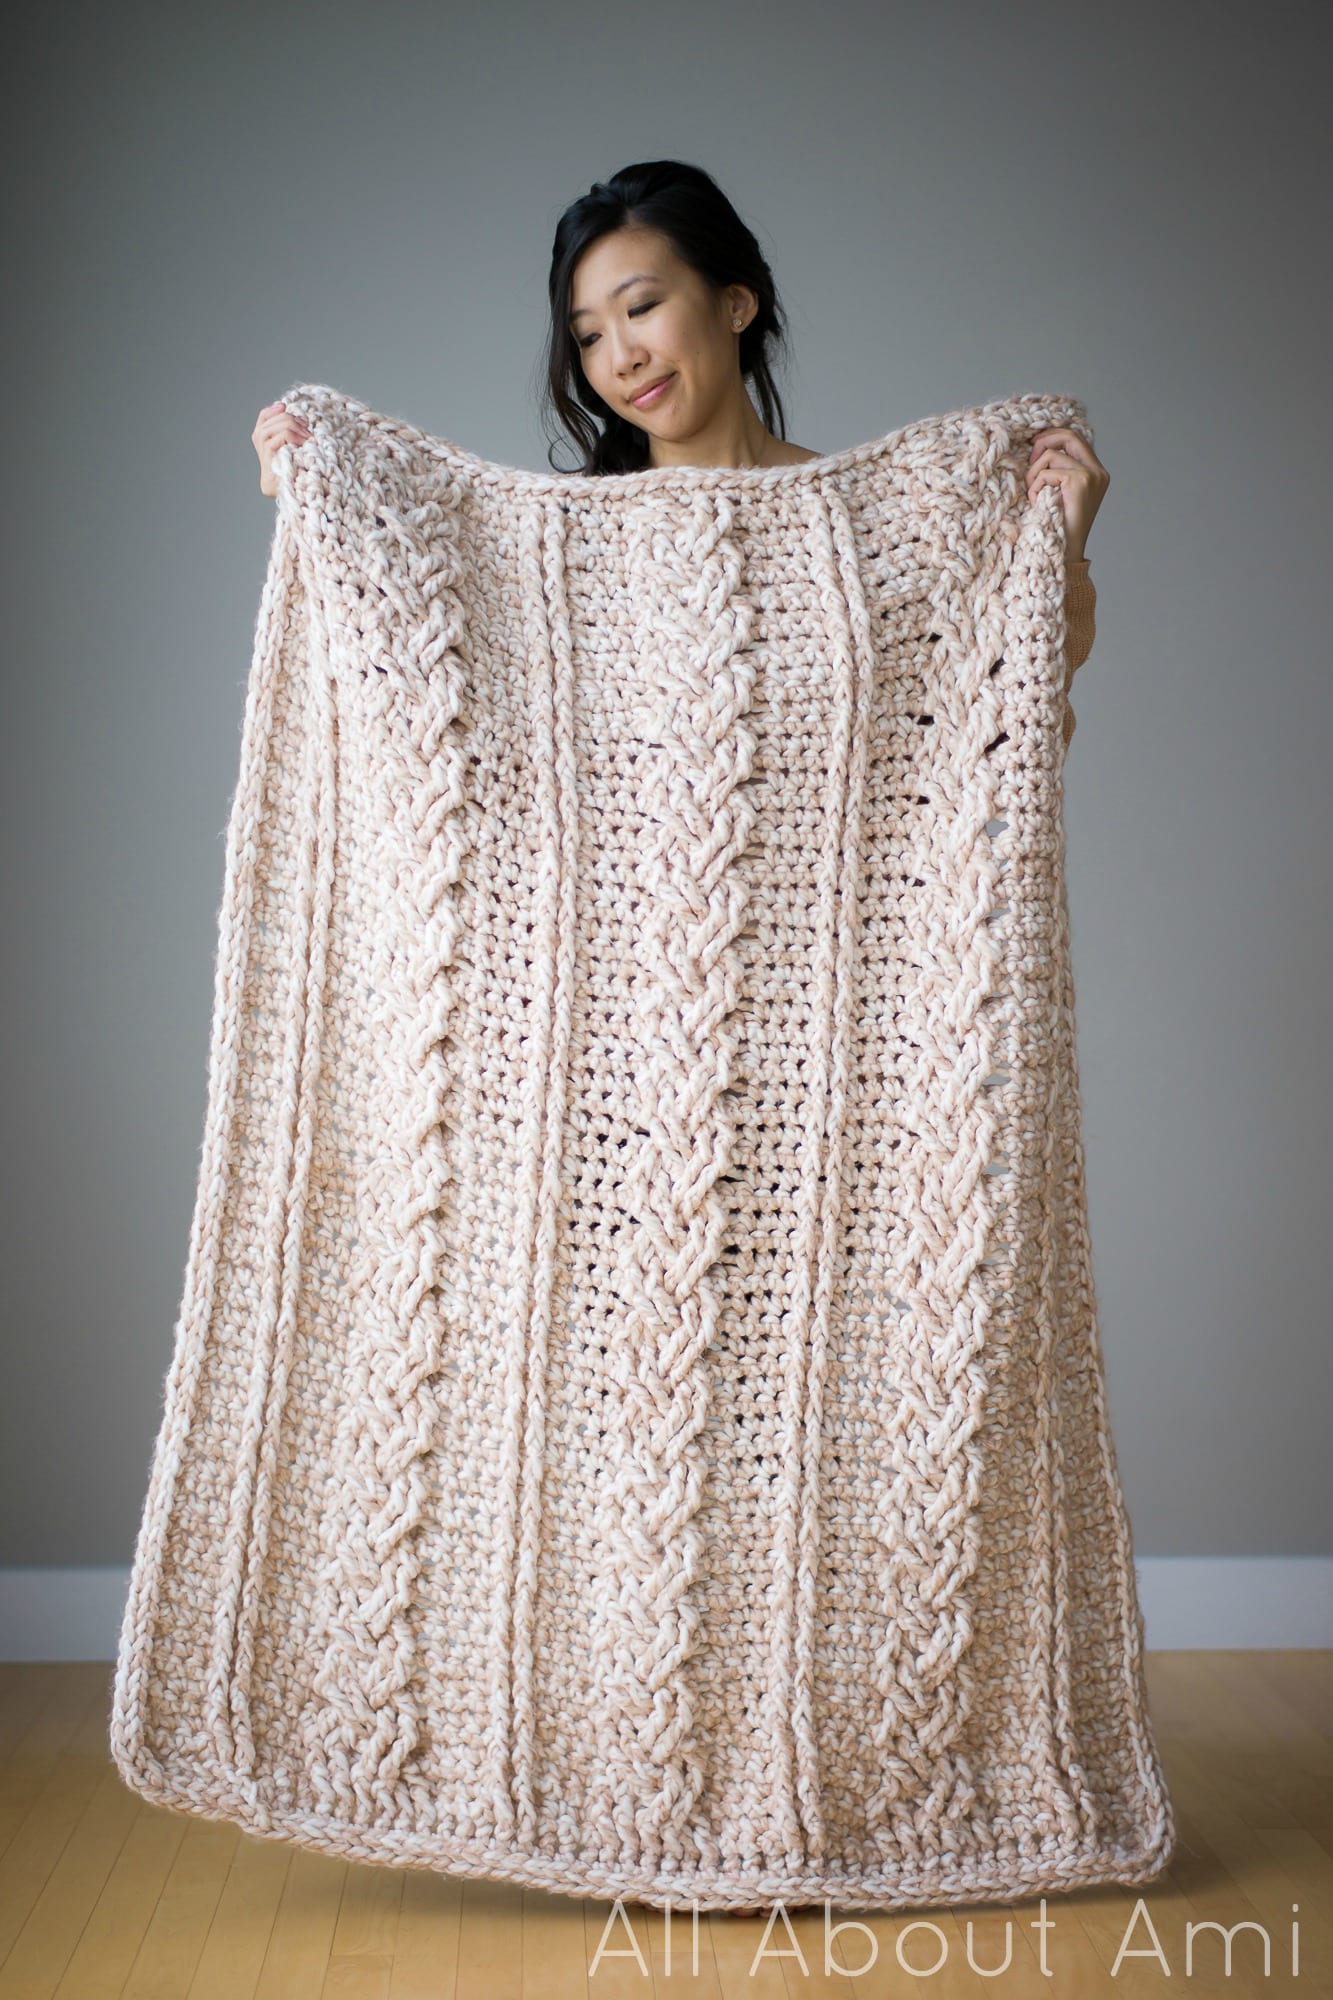 Chunky Braided Cabled Blanket - All About Ami